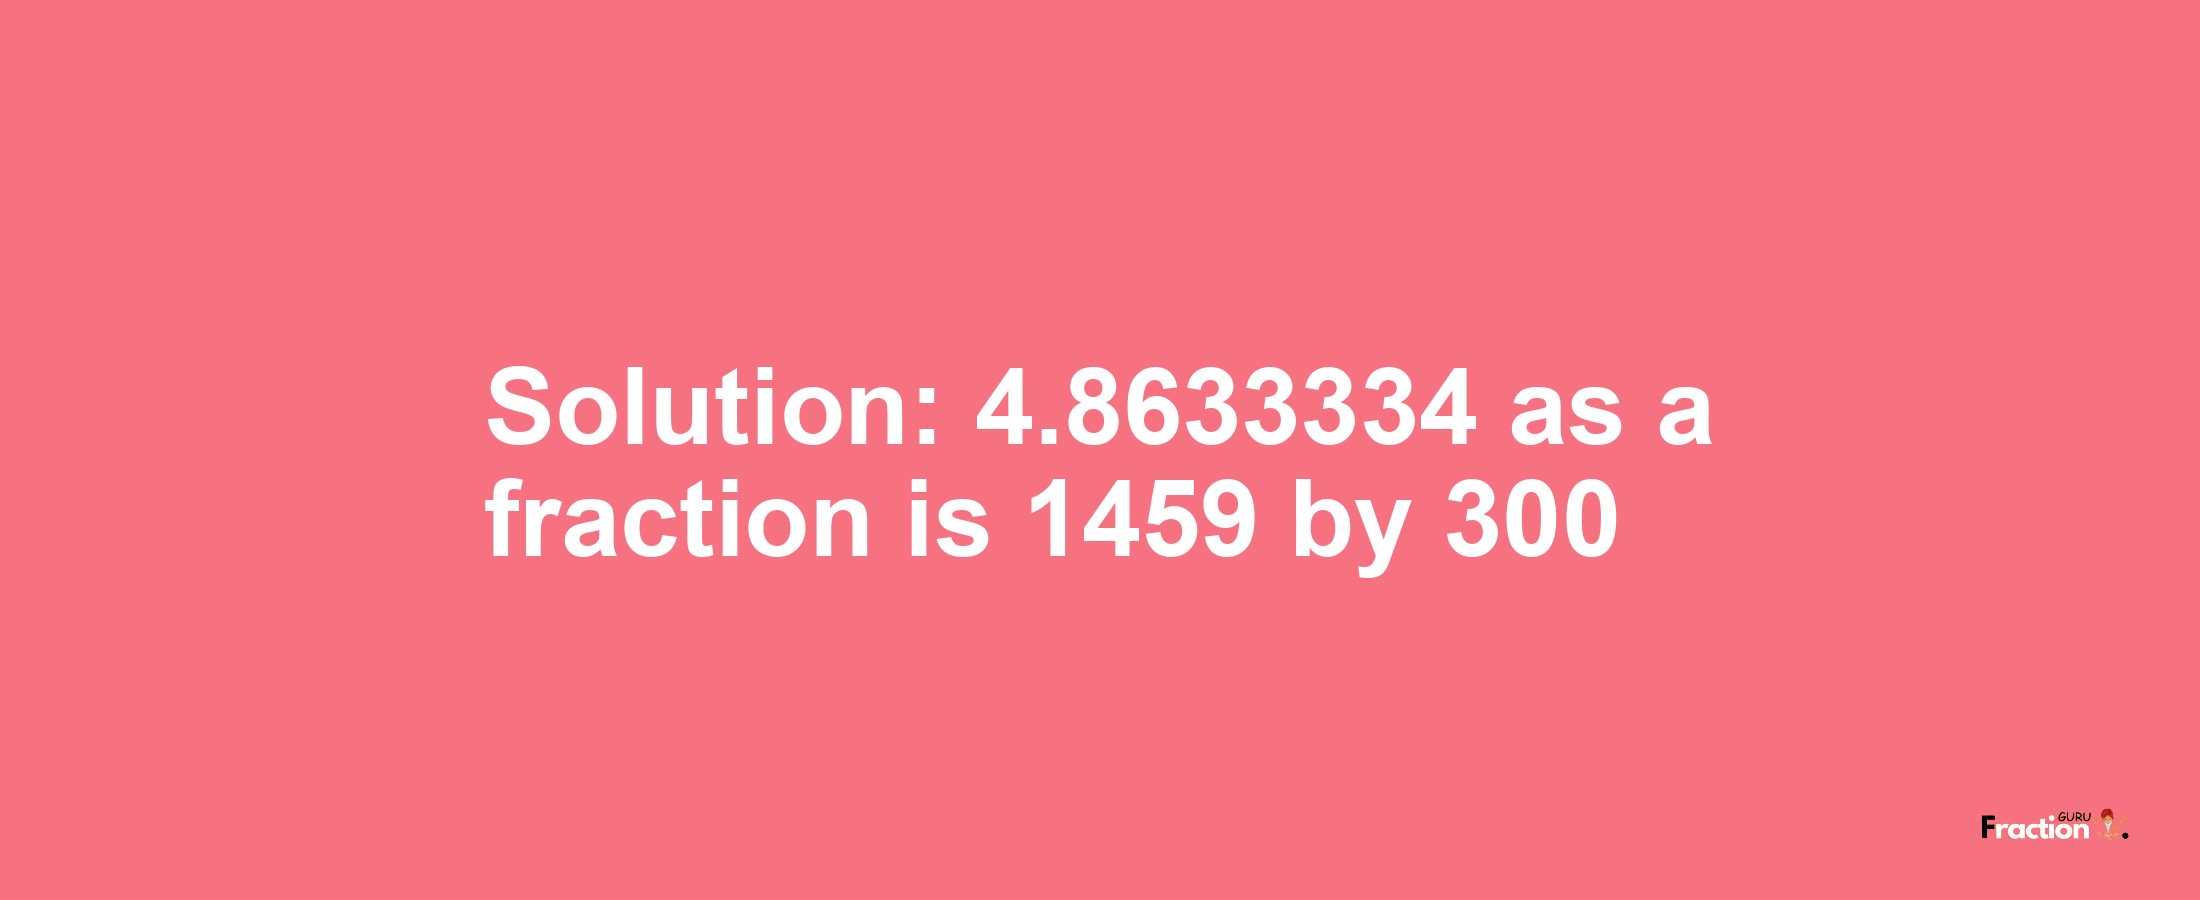 Solution:4.8633334 as a fraction is 1459/300